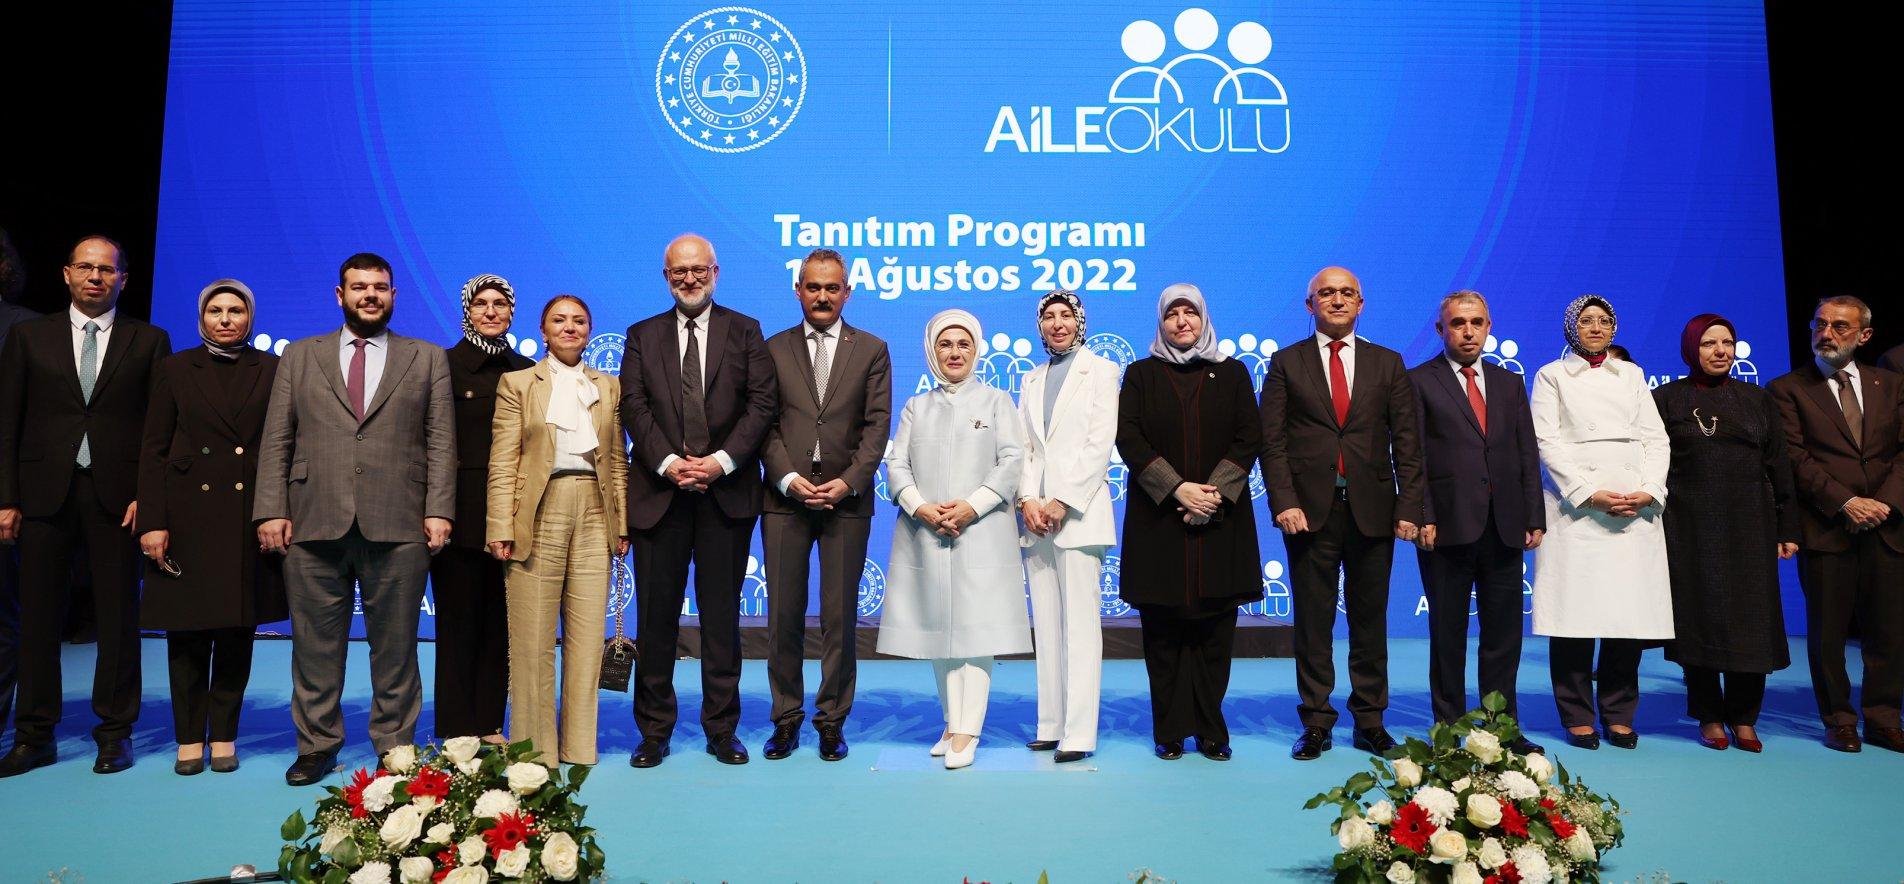 FAMILY SCHOOL PROJECT INTRODUCED TO THE PUBLIC WITH A CEREMONY PARTICIPATED BY EMİNE ERDOĞAN AND MINISTER ÖZER